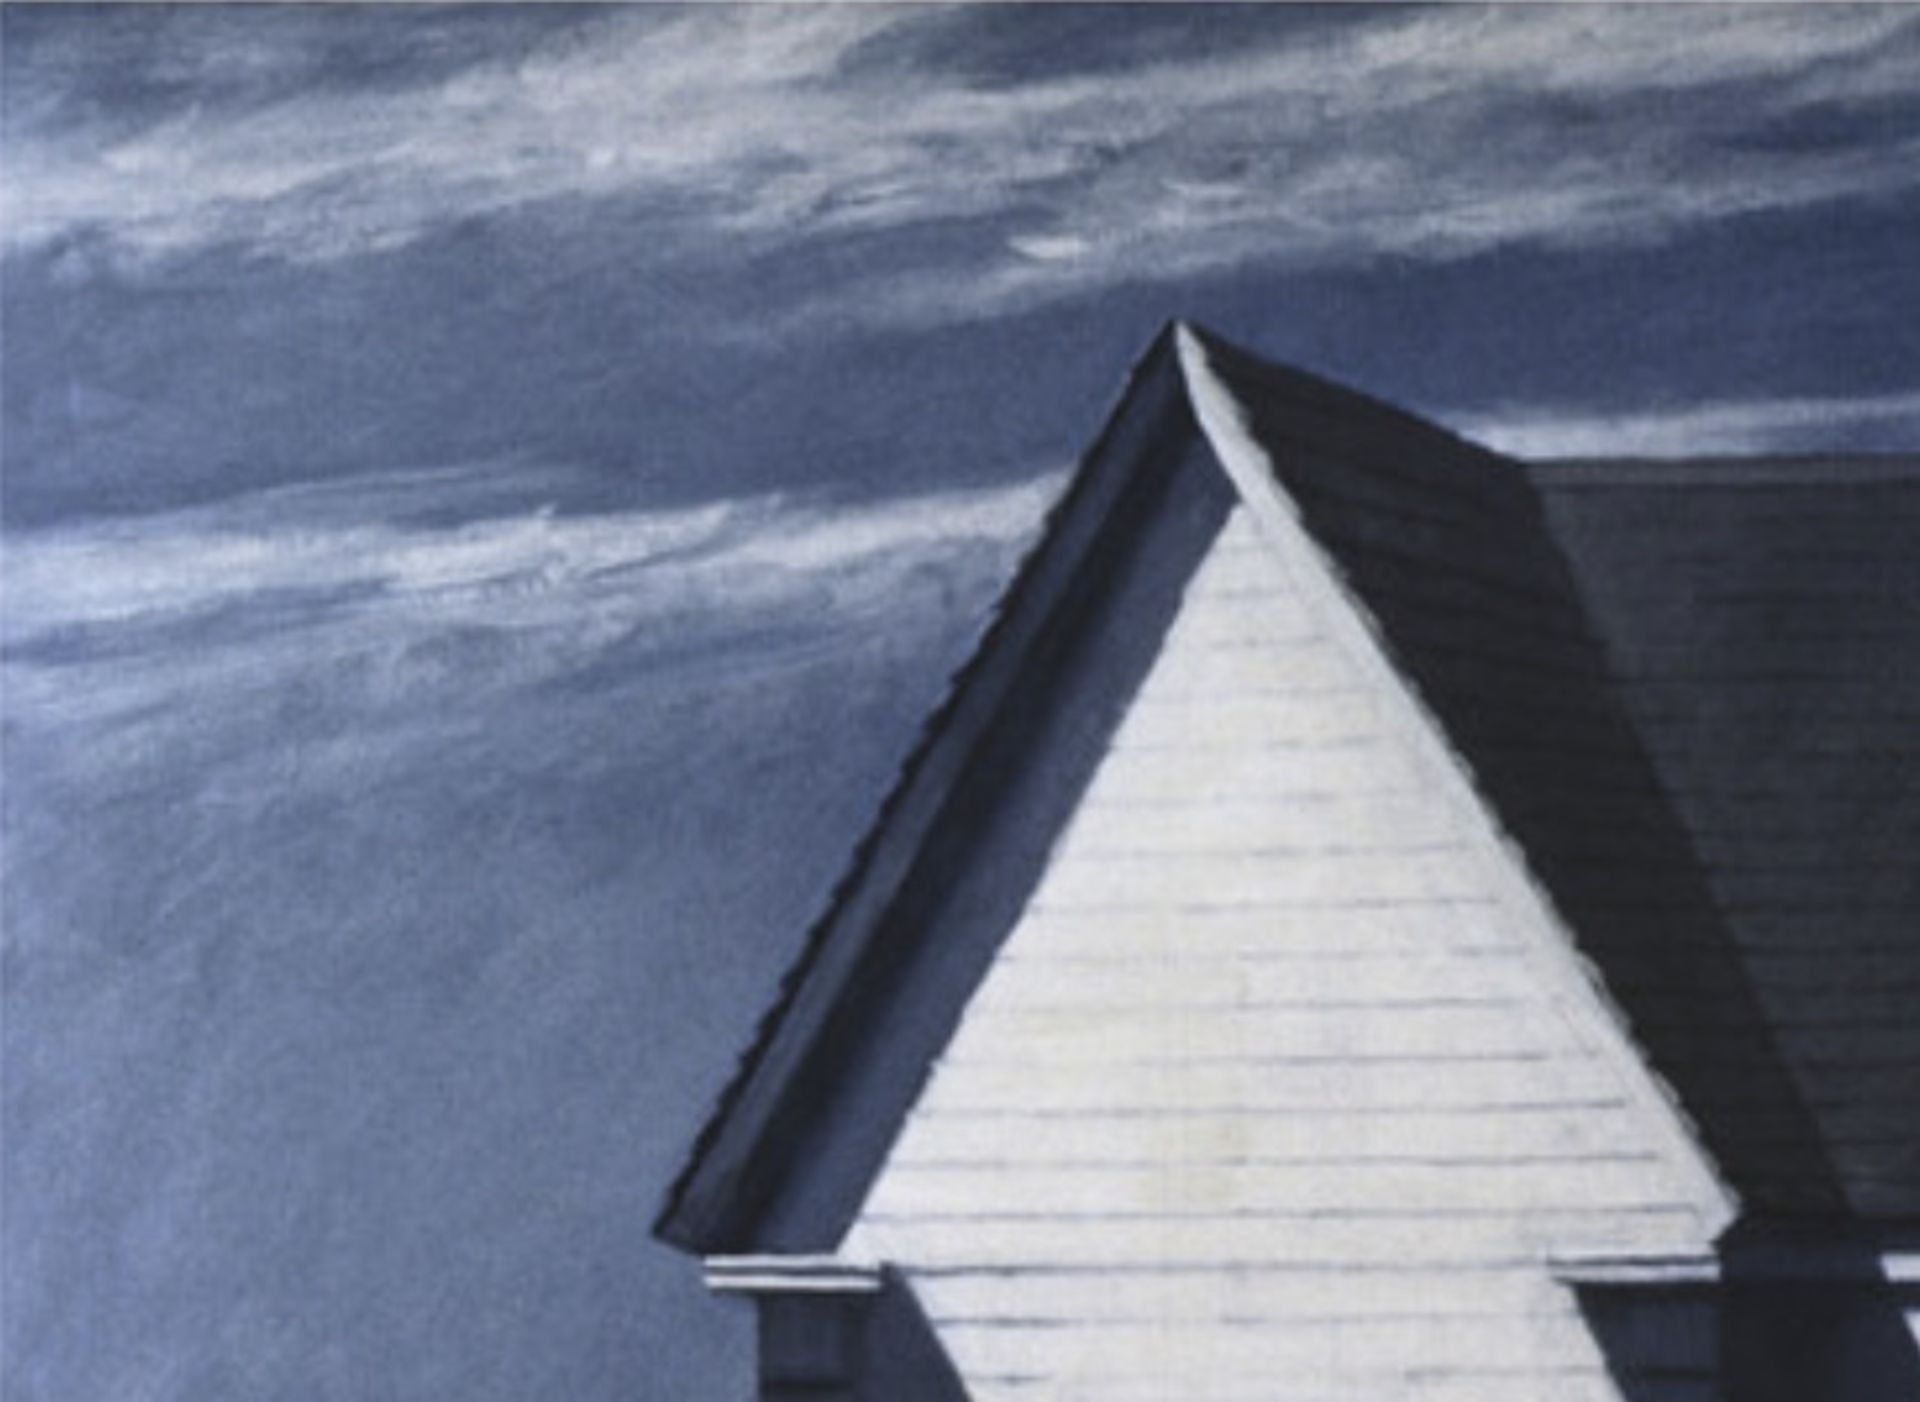 Edward Hopper "High Noon" Offset Lithograph - Image 2 of 5